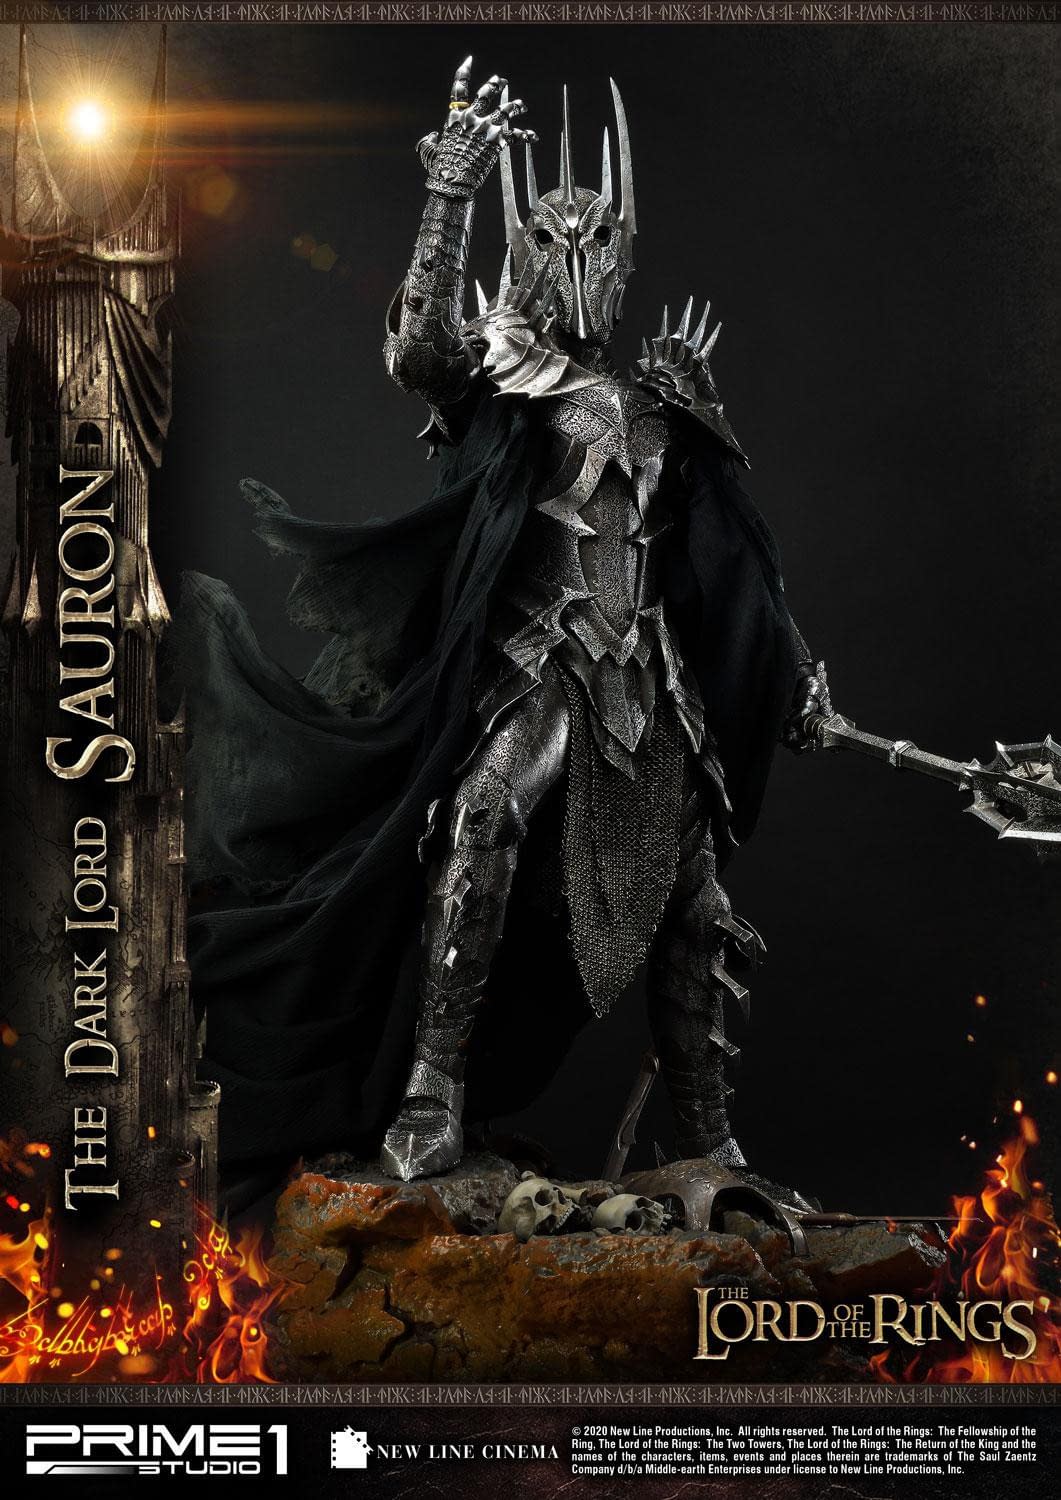 Sauron book 1 by dominic07 - Issuu